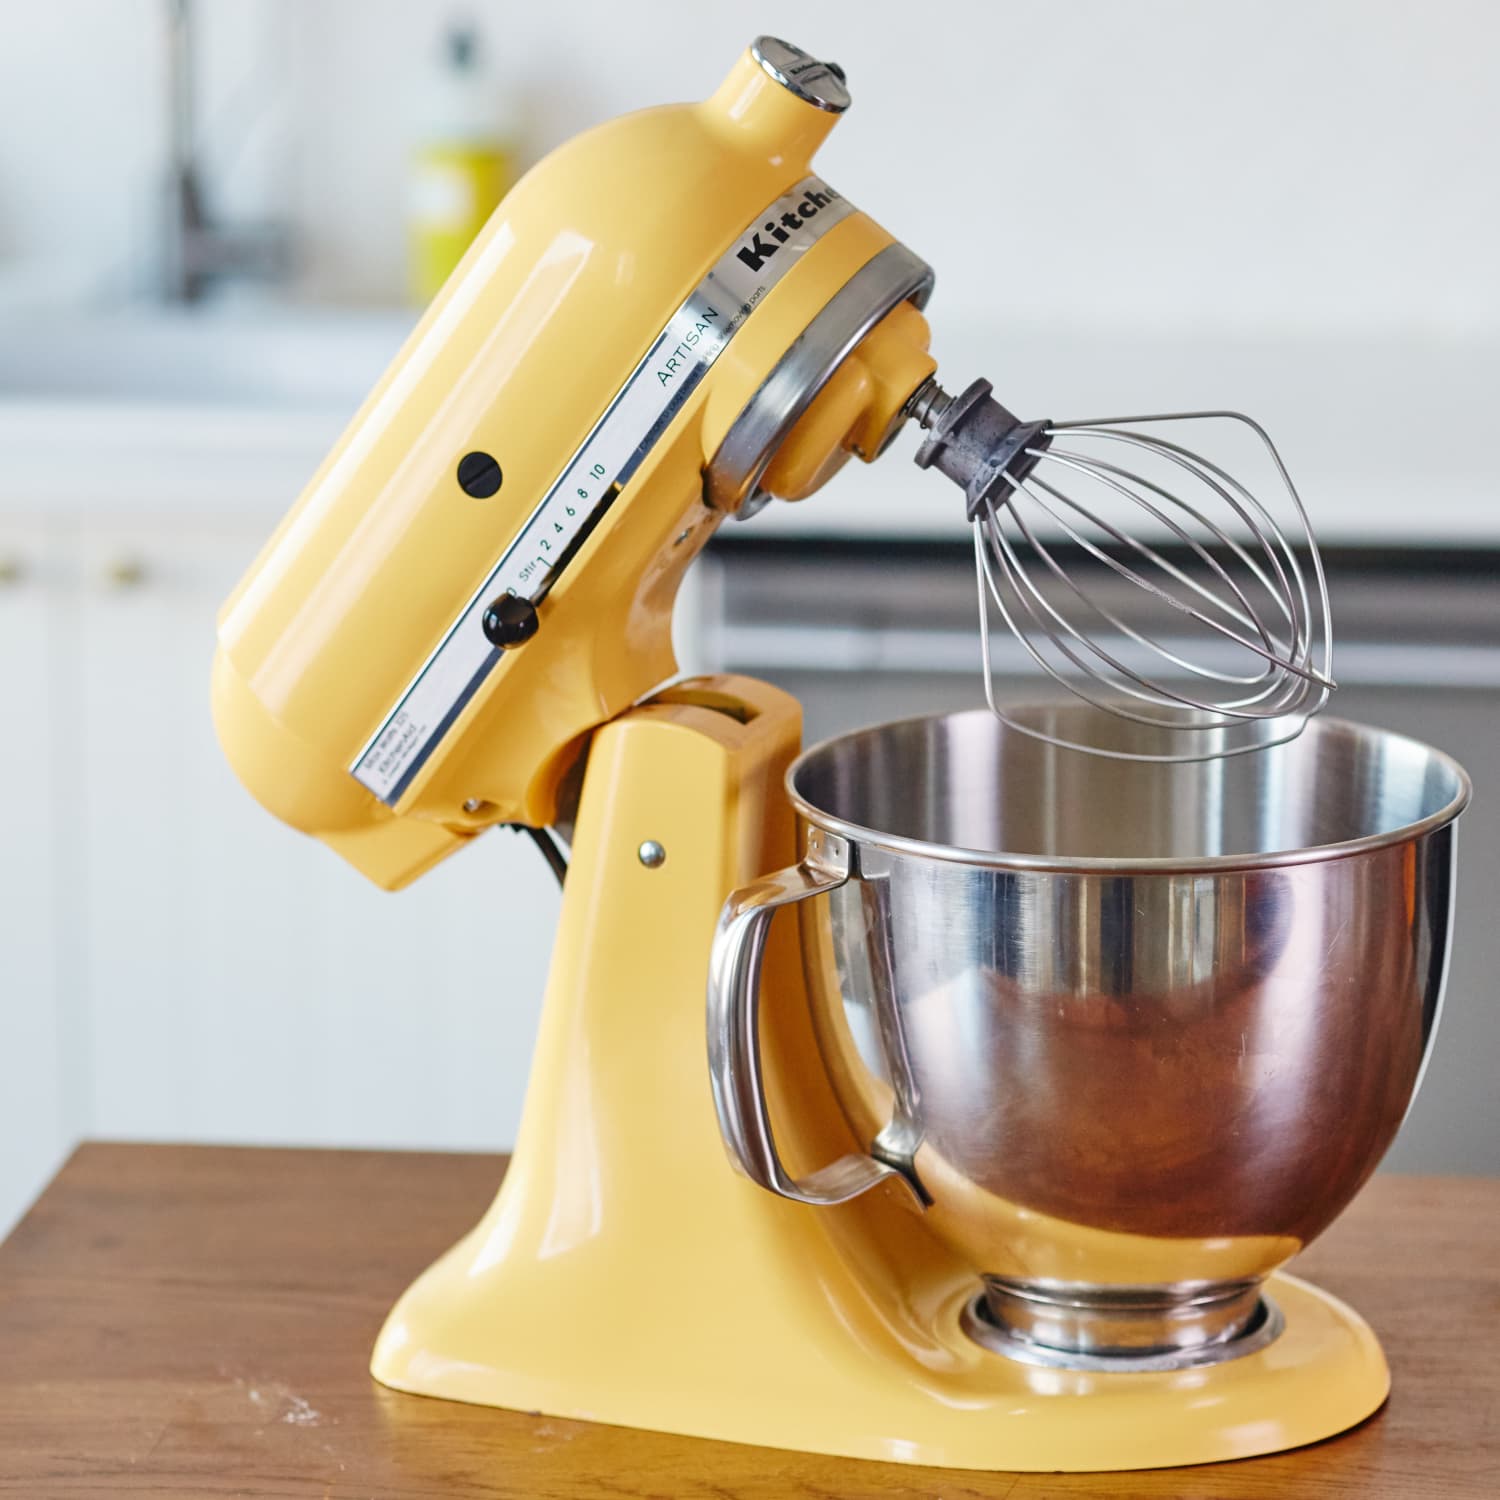 You Can Create A Custom KitchenAid With This New Tool